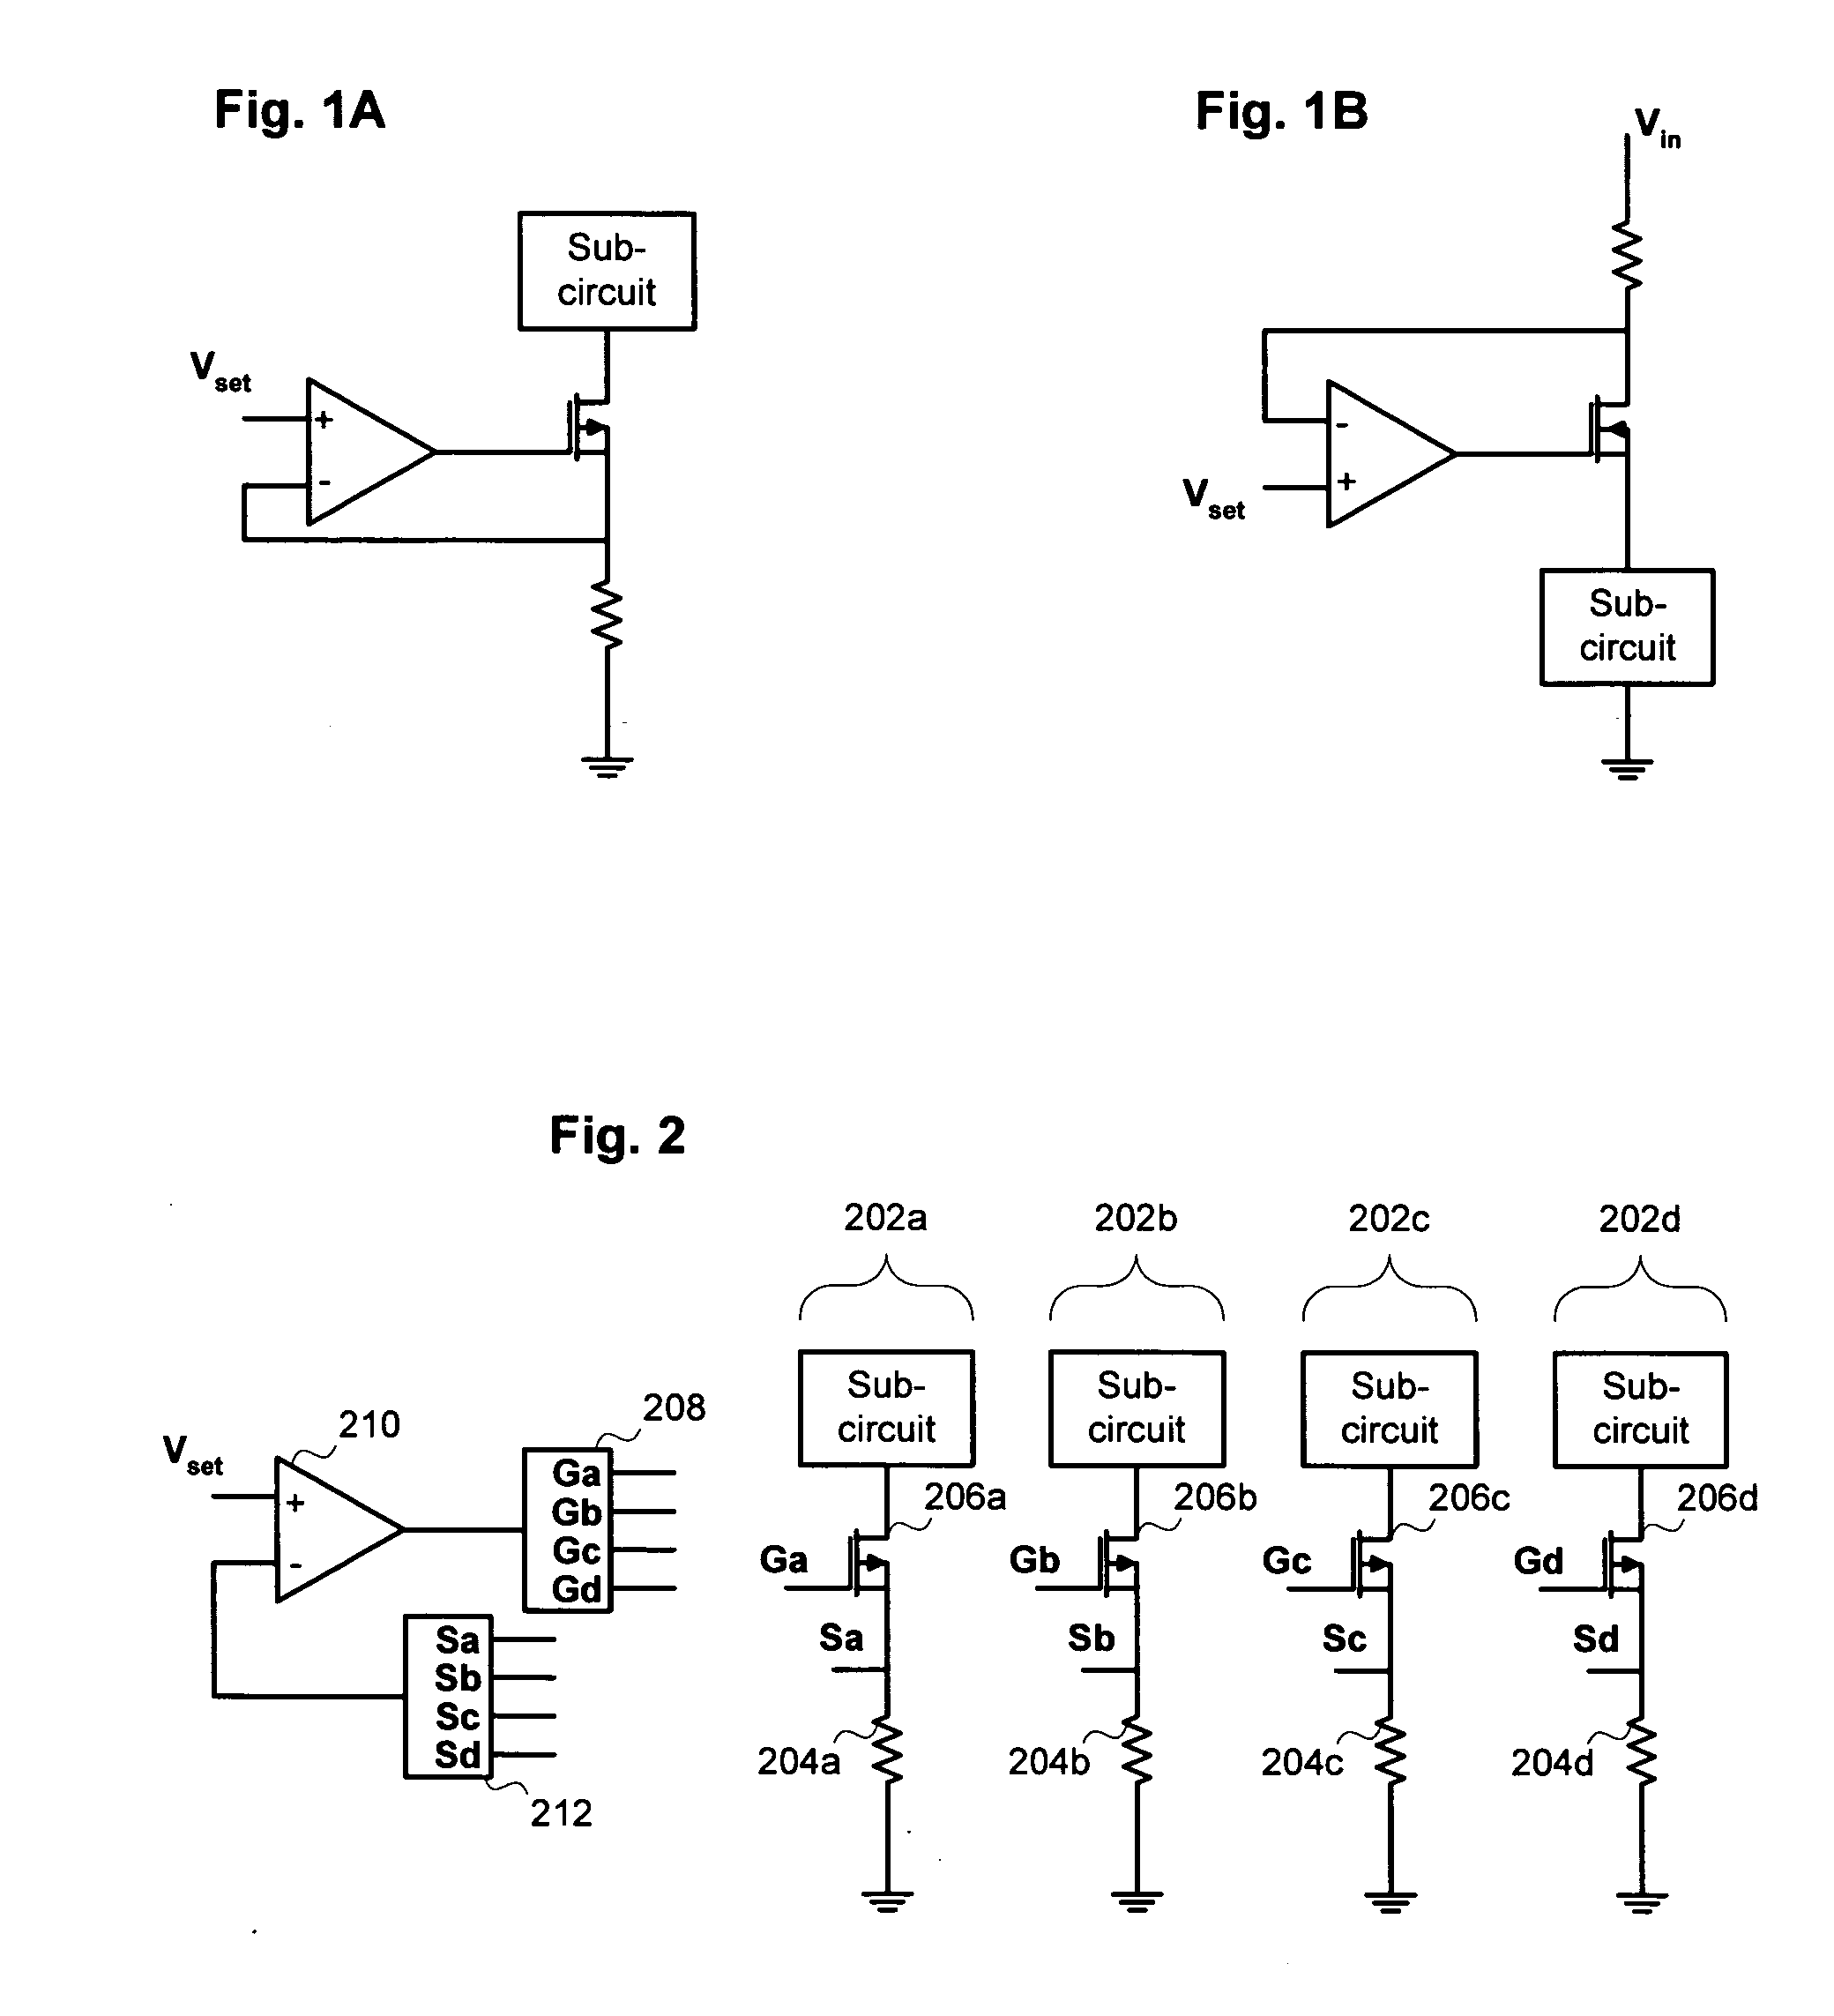 Single, multiplexed operational amplifier to improve current matching between channels